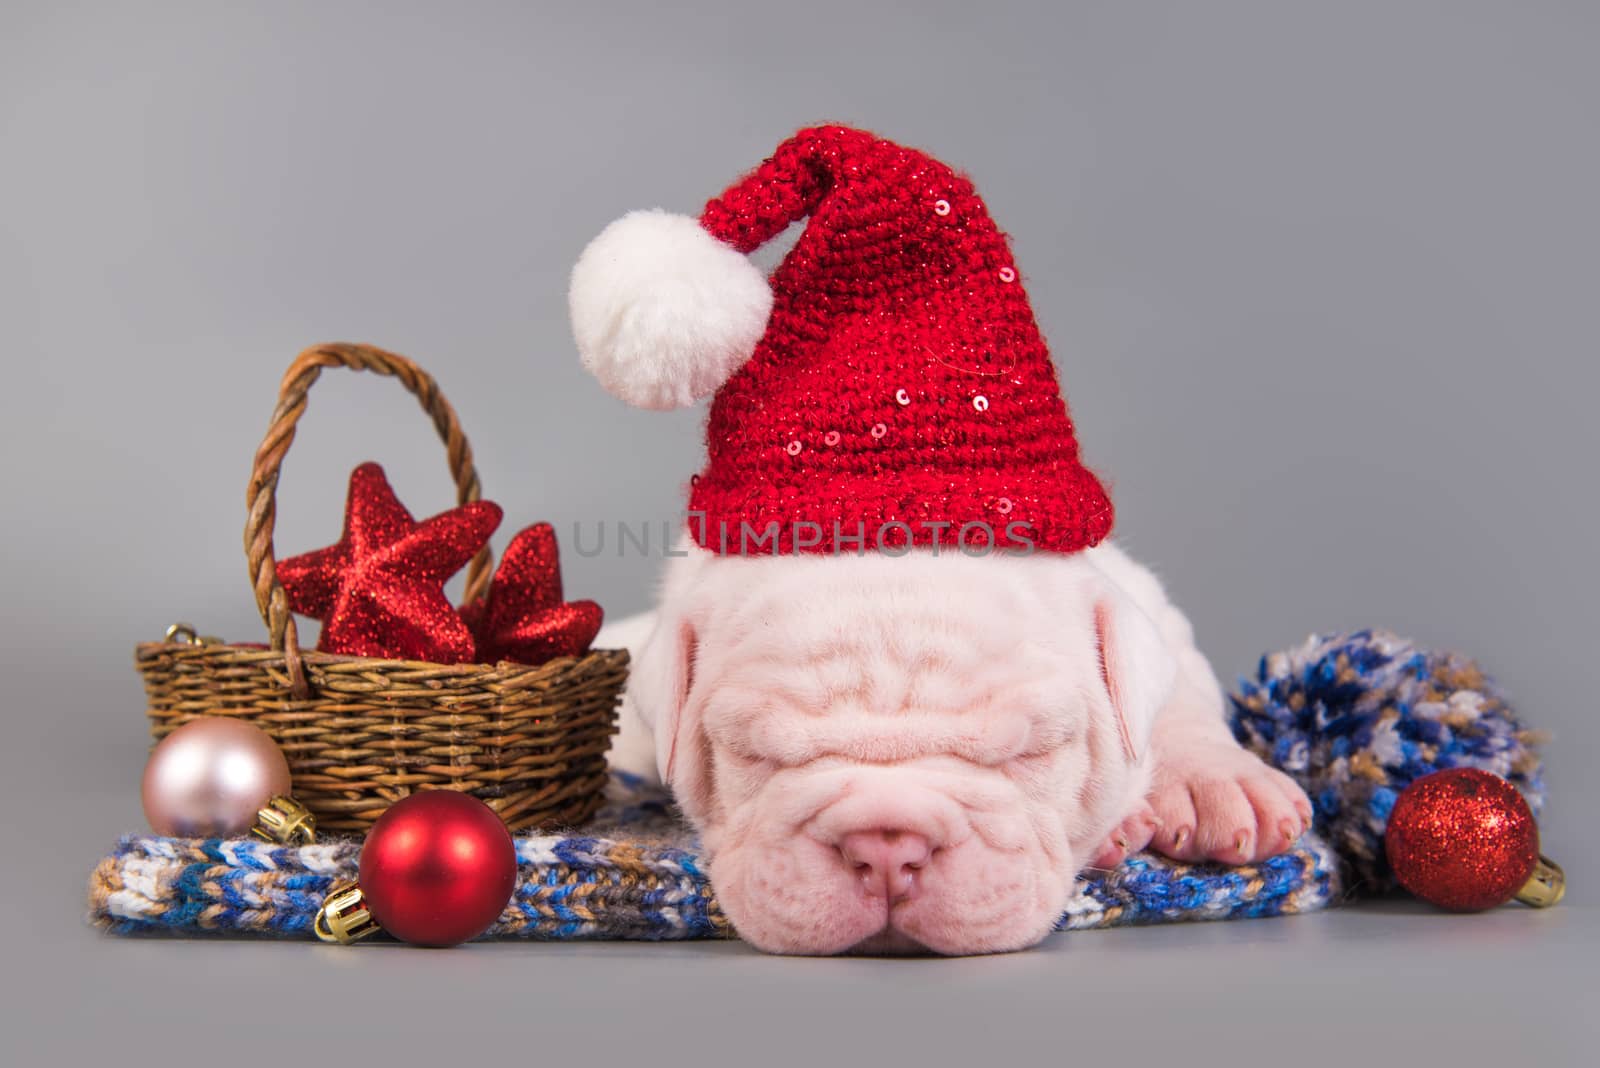 Funny American Bulldog puppy dog with santa claus hat is sleeping. Christmas or New Year background